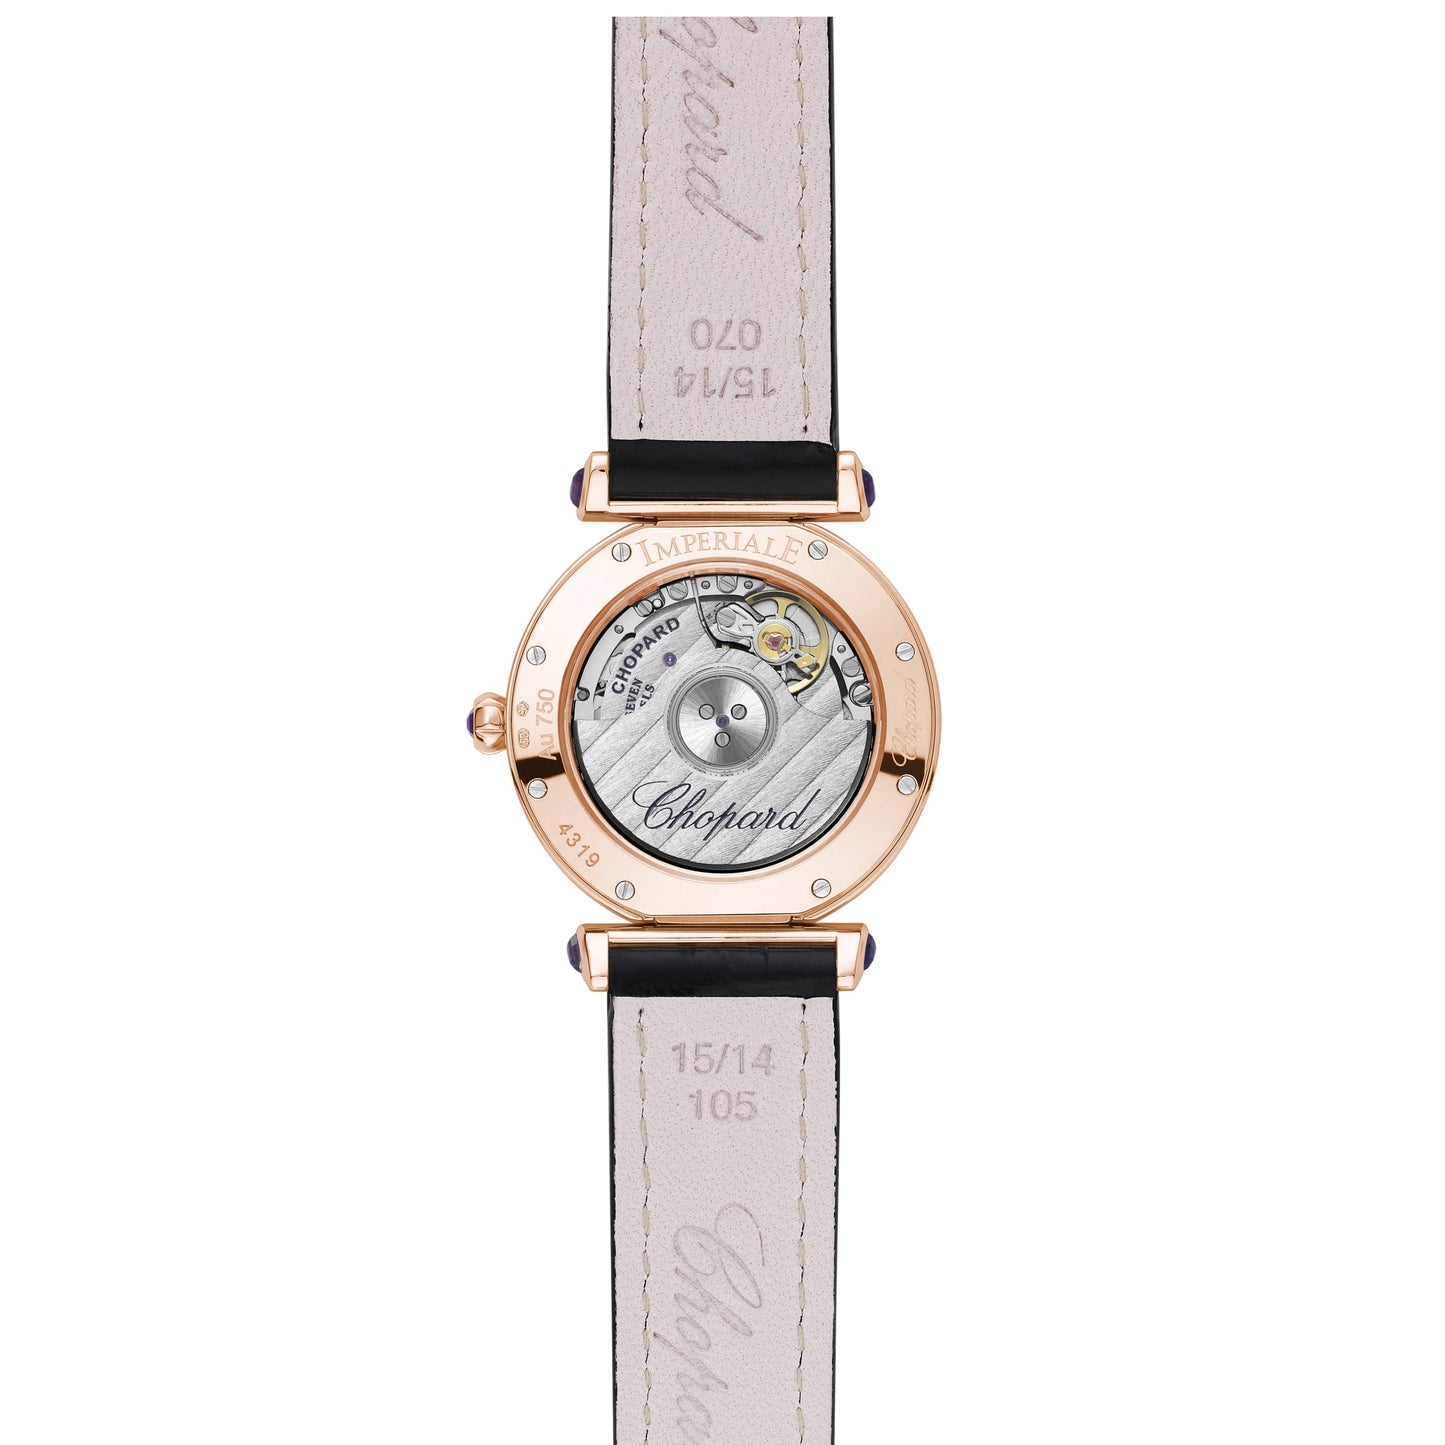 IMPERIALE 29 MM, AUTOMATIC, ETHICAL ROSE GOLD, DIAMONDS 384319-5007